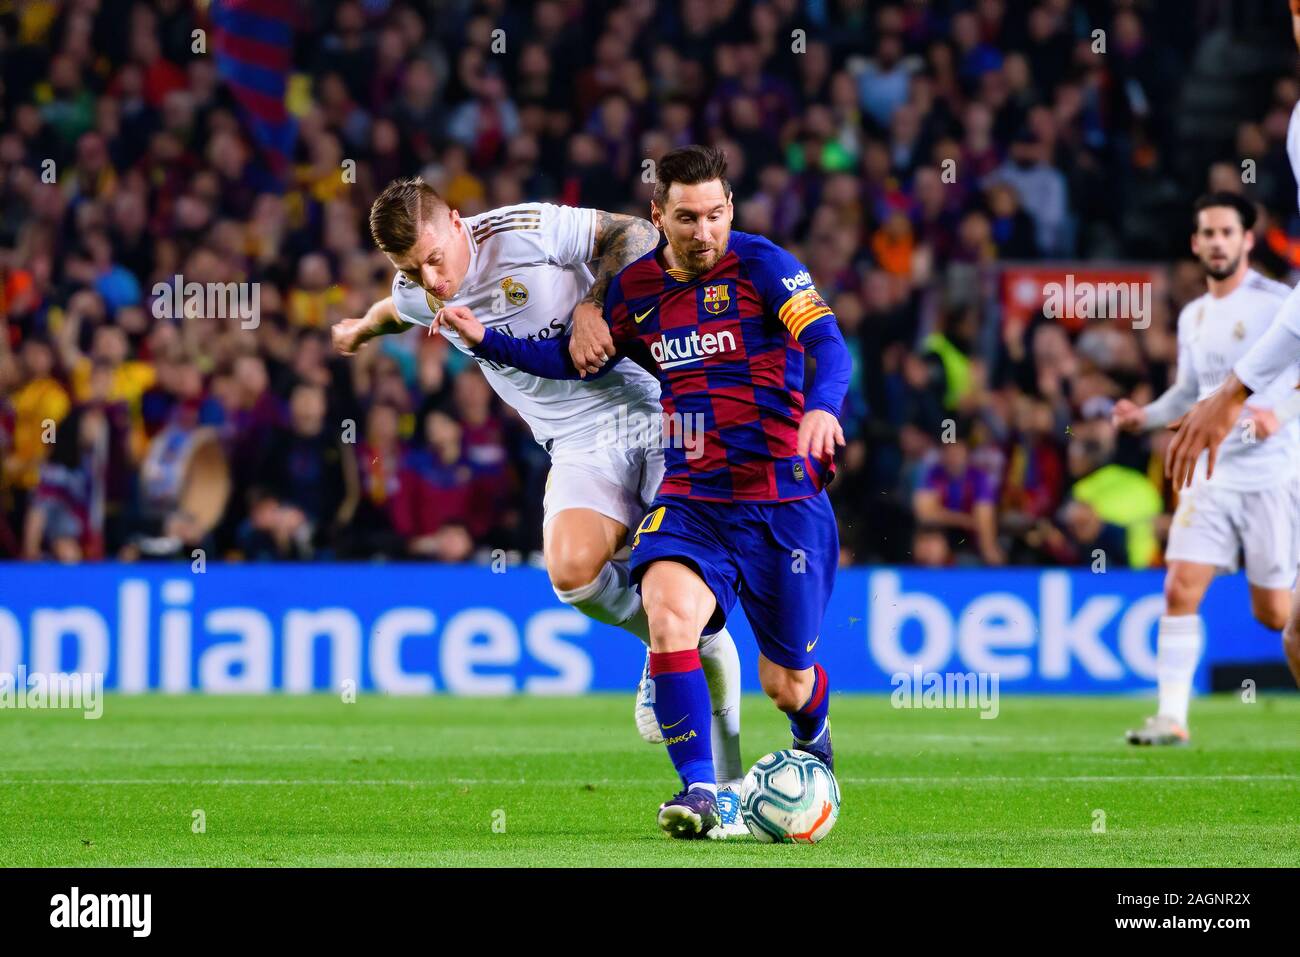 BARCELONA - DEC 18: Kroos (L) and Messi (R) play at the La Liga match between FC Barcelona and Real Madrid at the Camp Nou Stadium on December 18, 201 Stock Photo